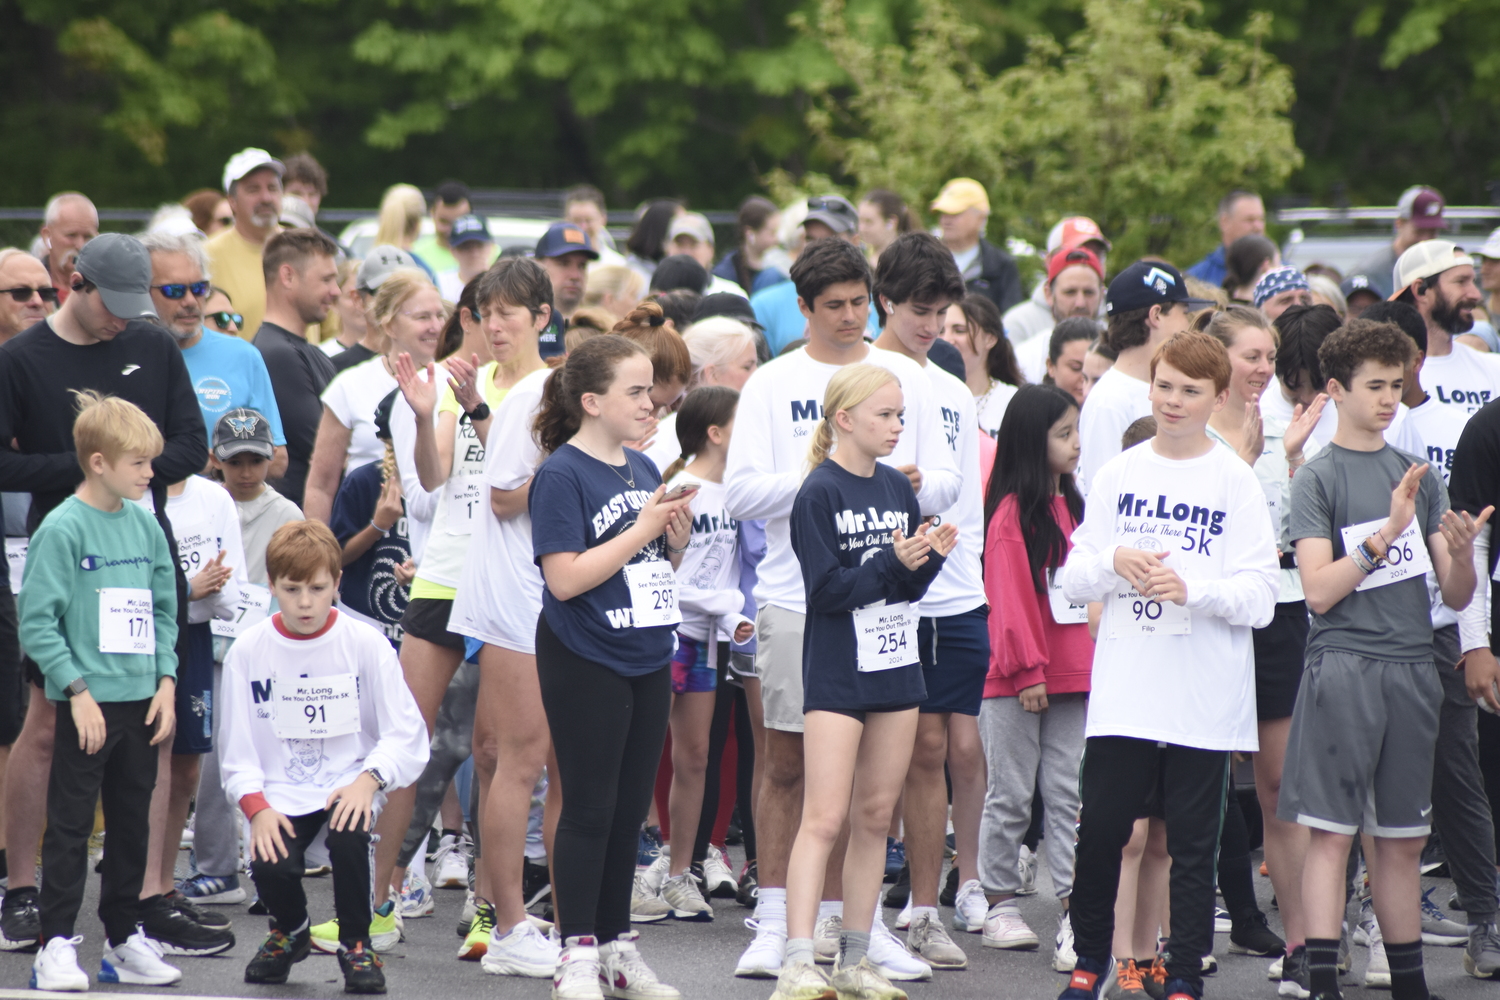 Runners are set for the start of the second annual Mr. Long 